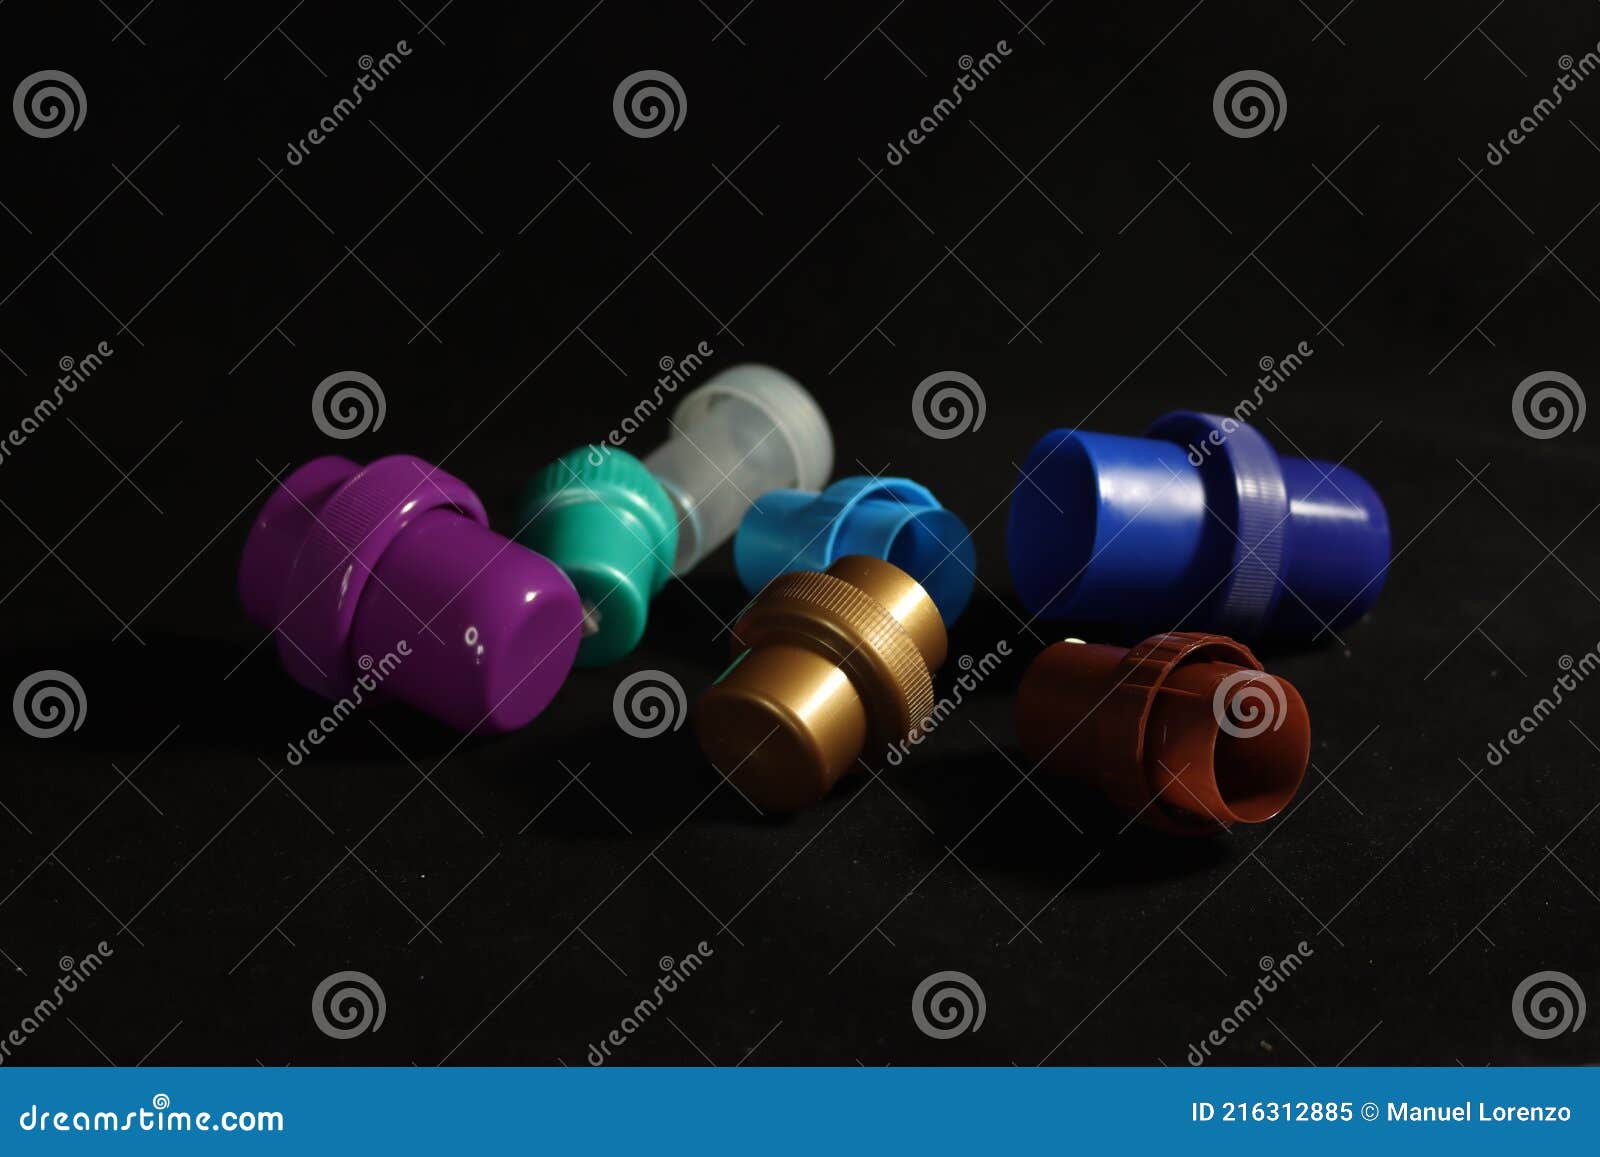 beautiful plastic plugs colors different dosing protection different